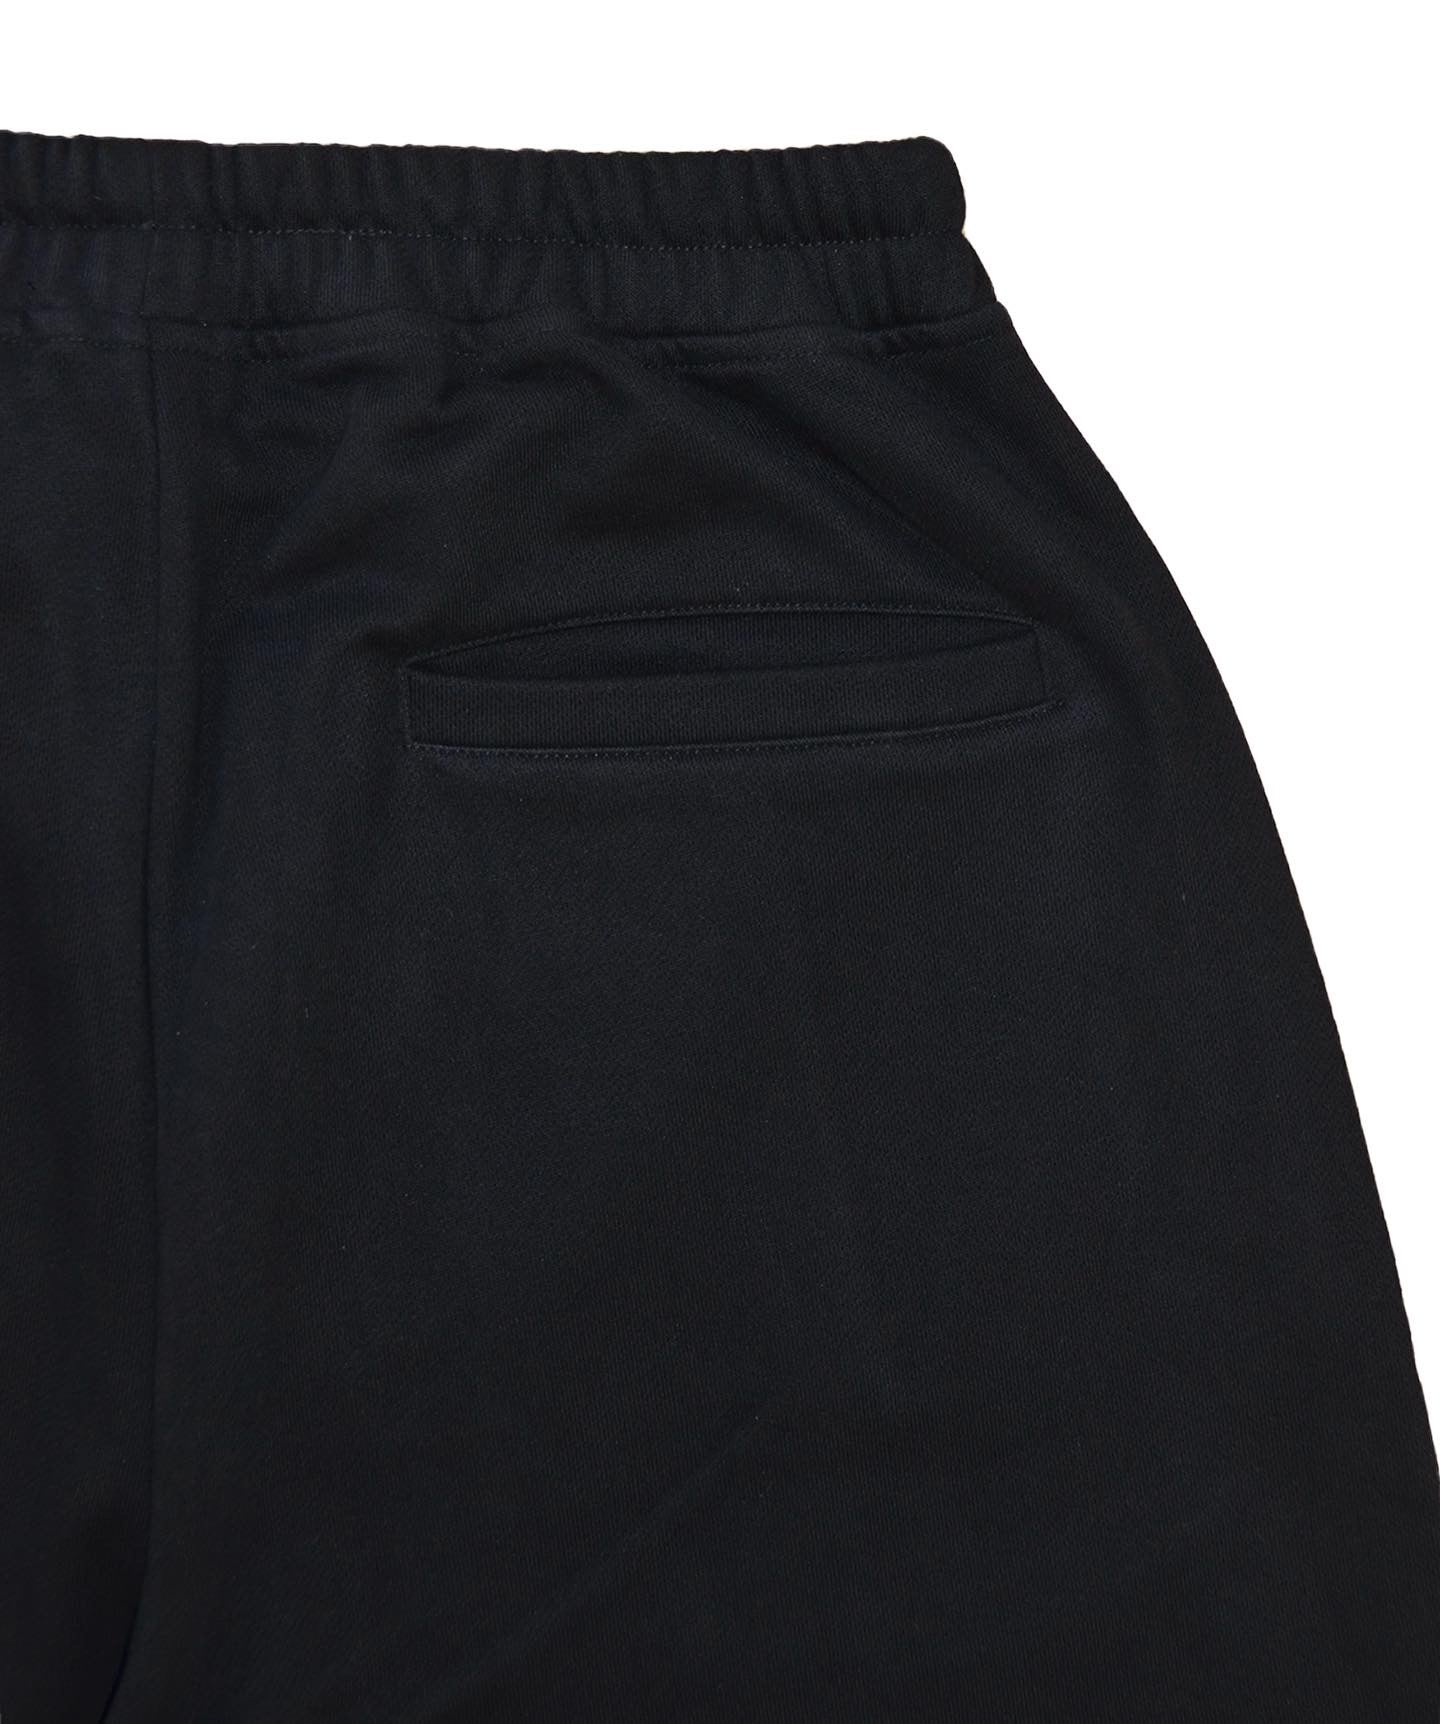 BLACK OVER-DYED BAGGY SWEATPANTS